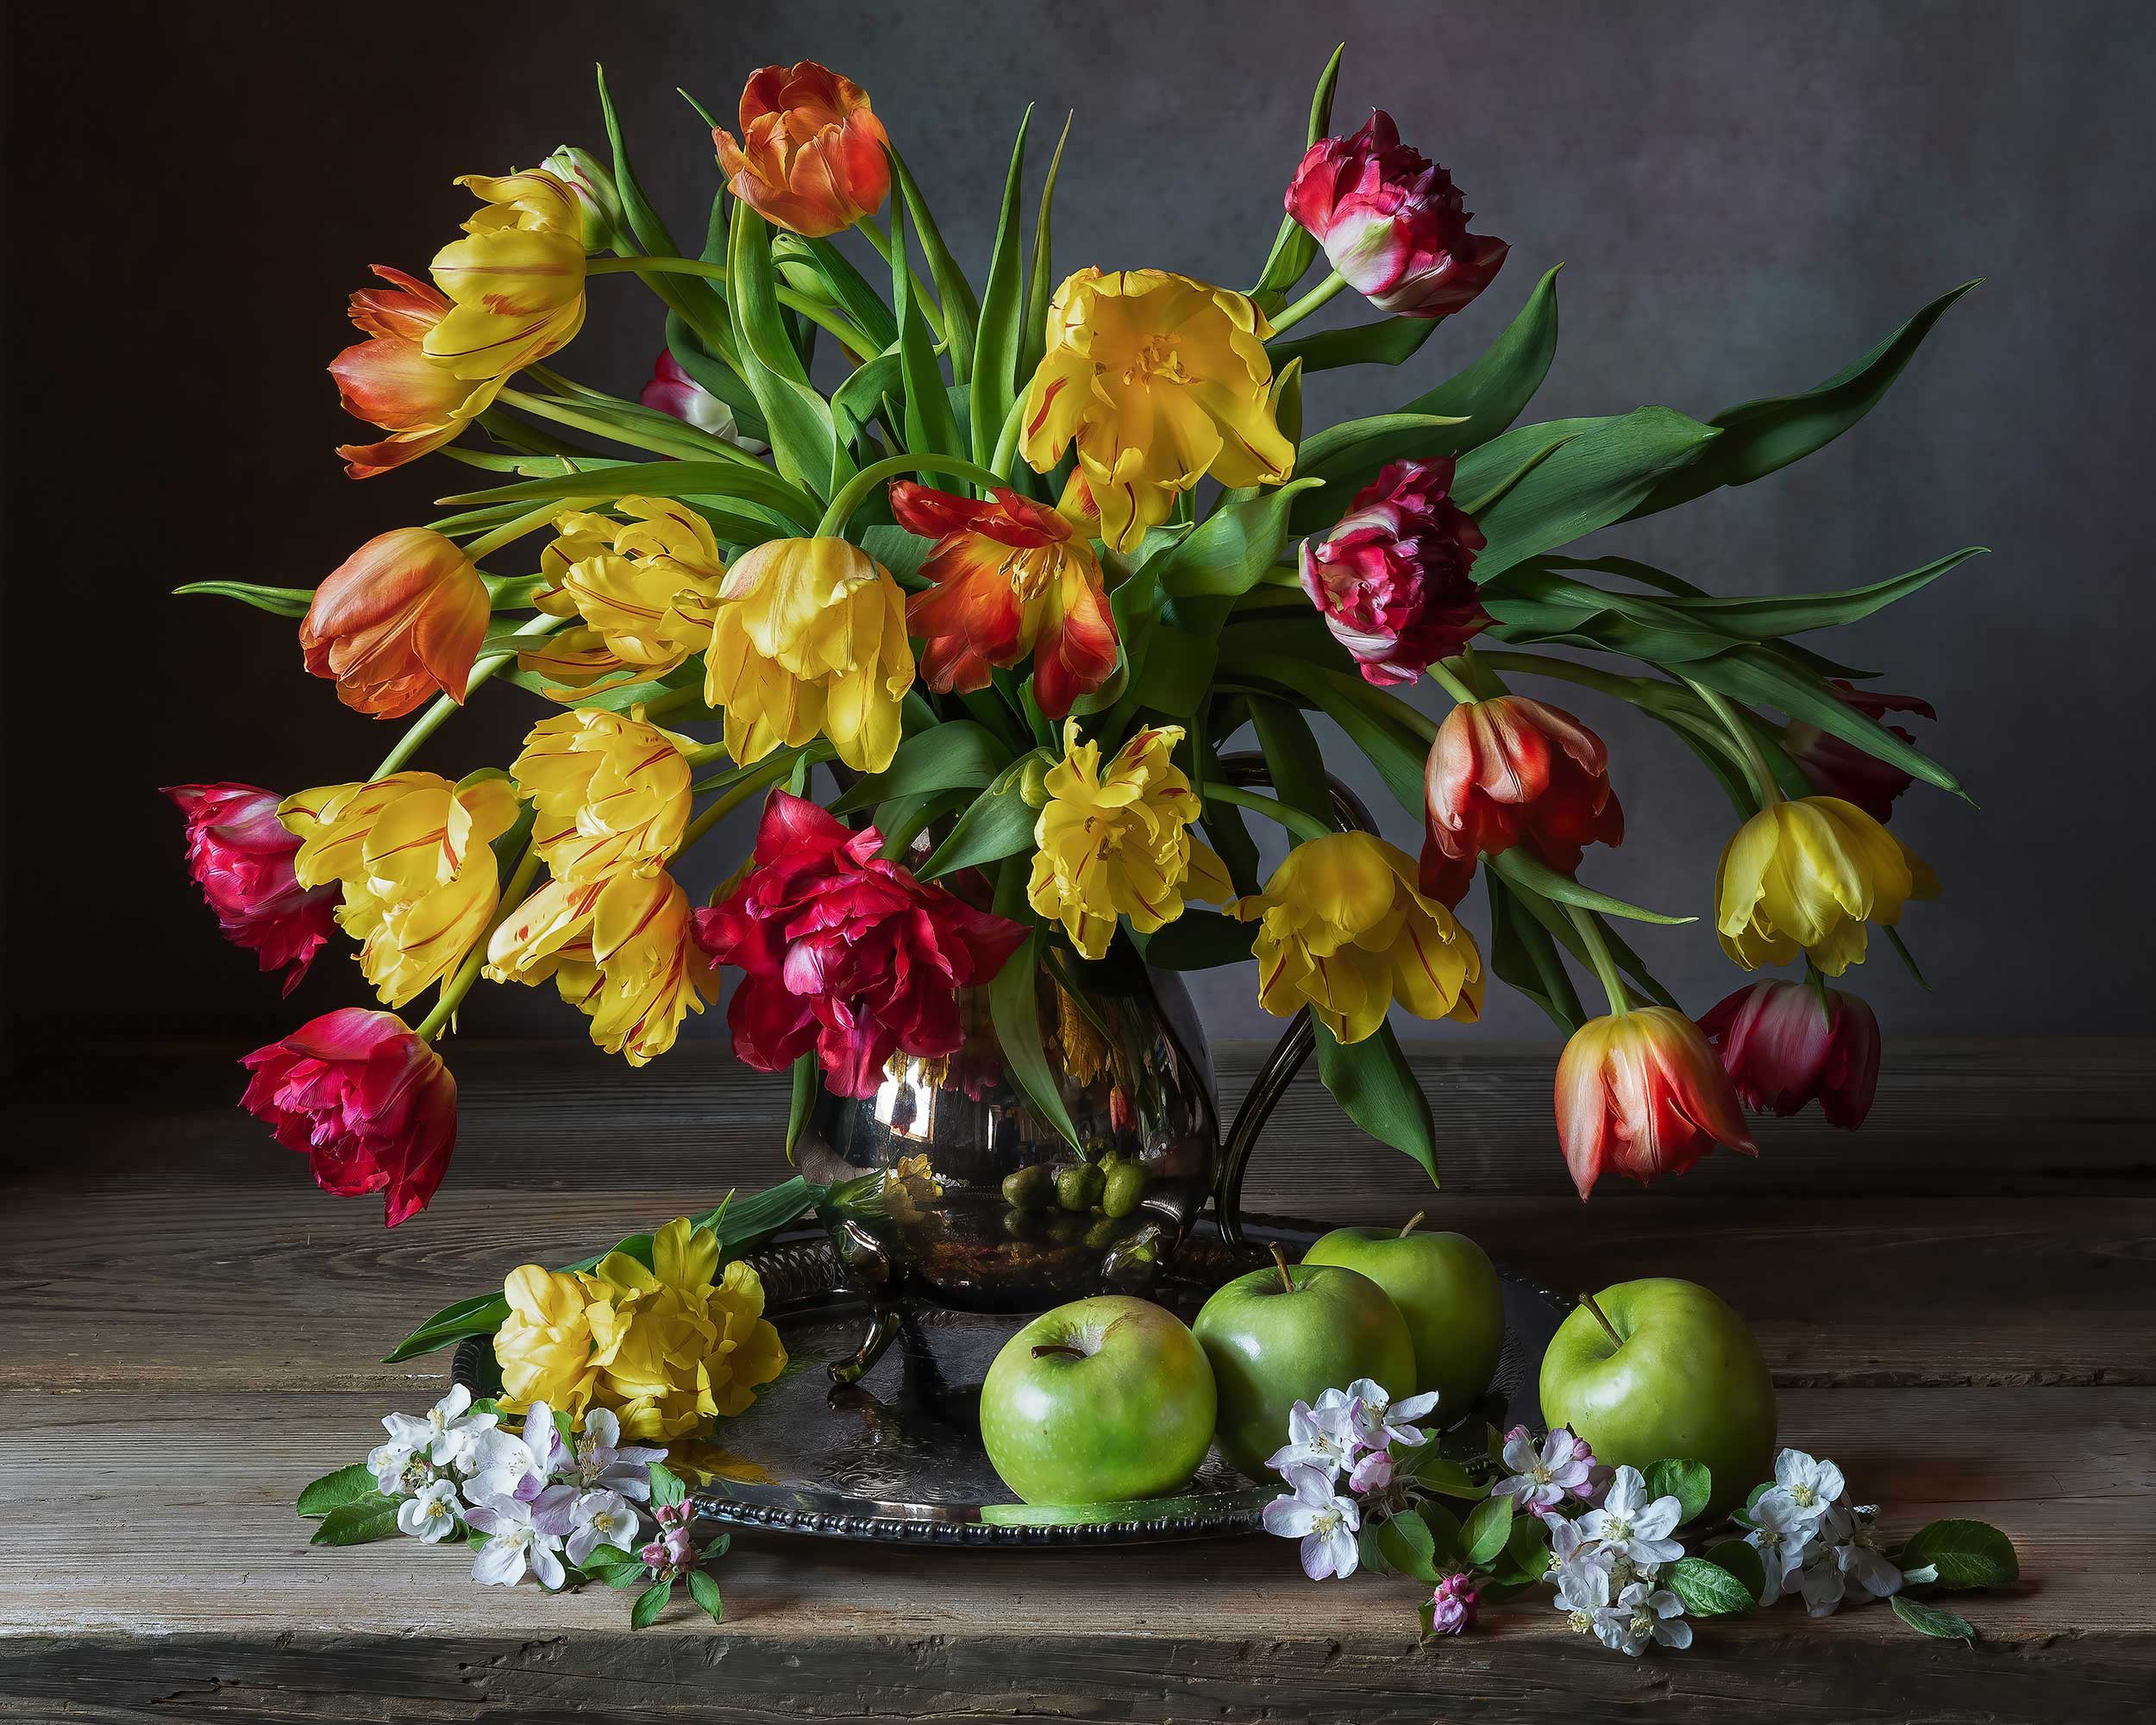 apples, tulips, flowers, spring blooms, still life photography, Слуцкая Яна